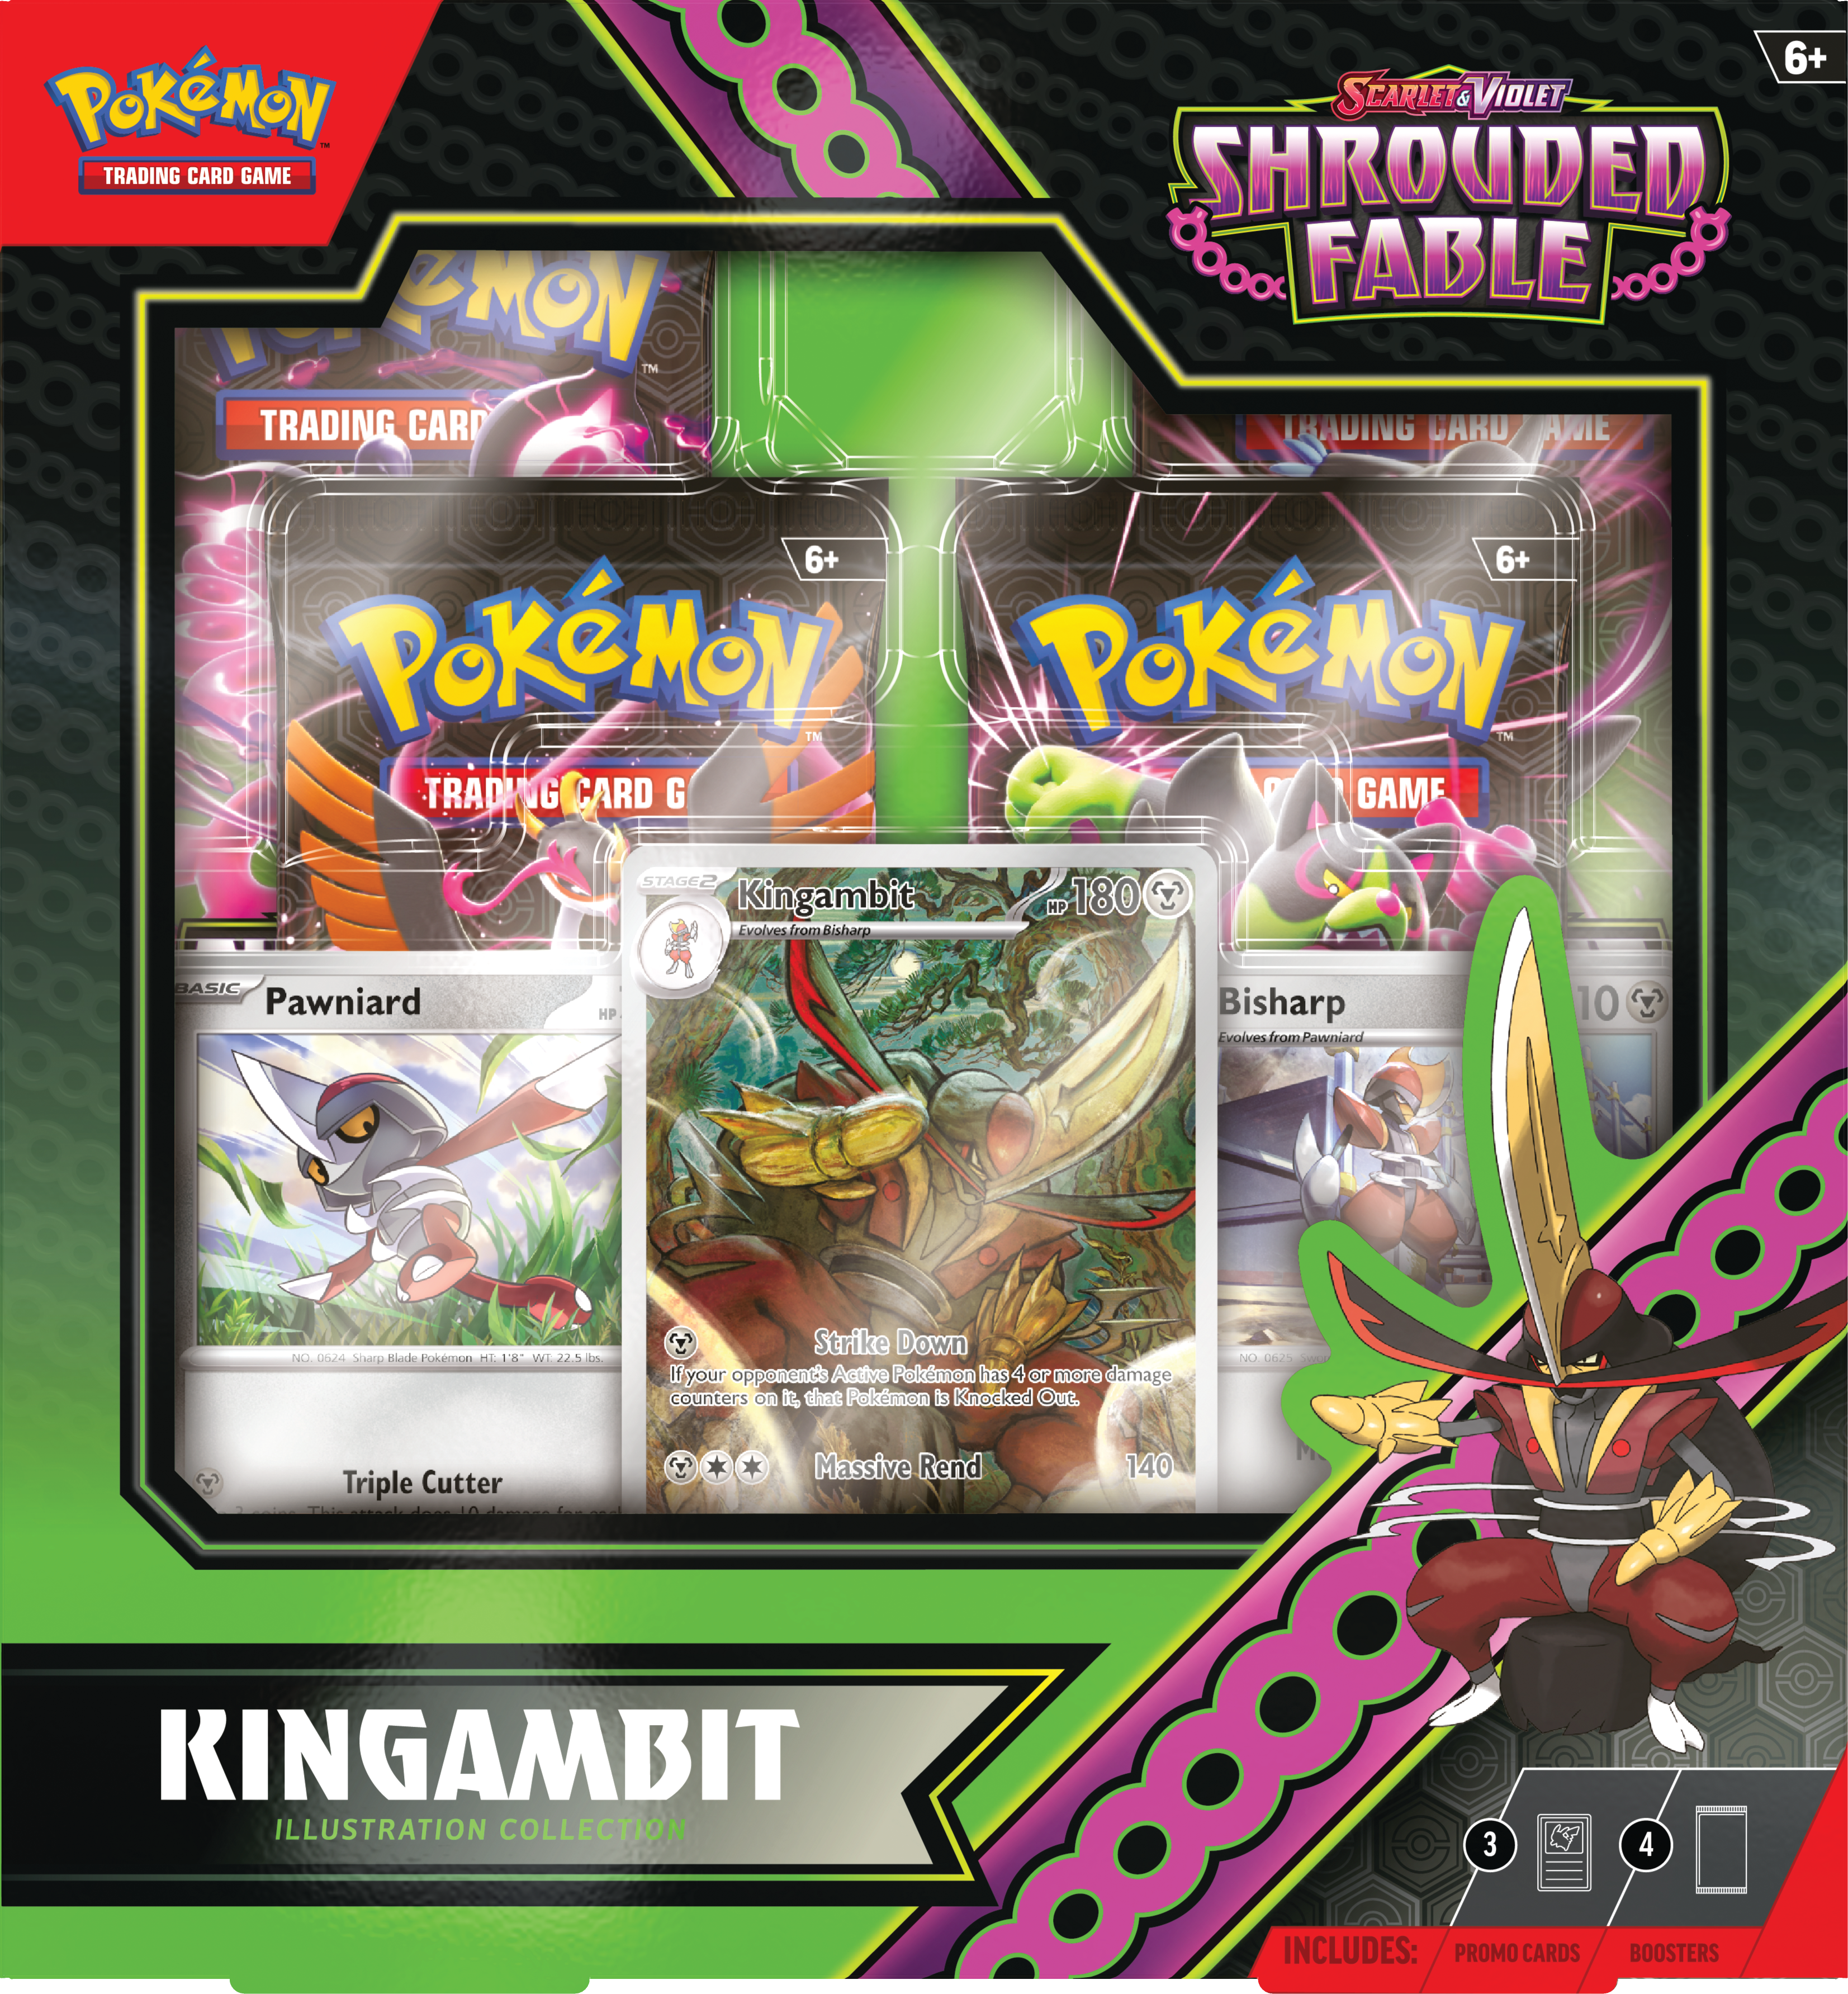 Pokemon Trading Card Game: Scarlet and Violet Shrouded Fable Kingambit Illustration Collection